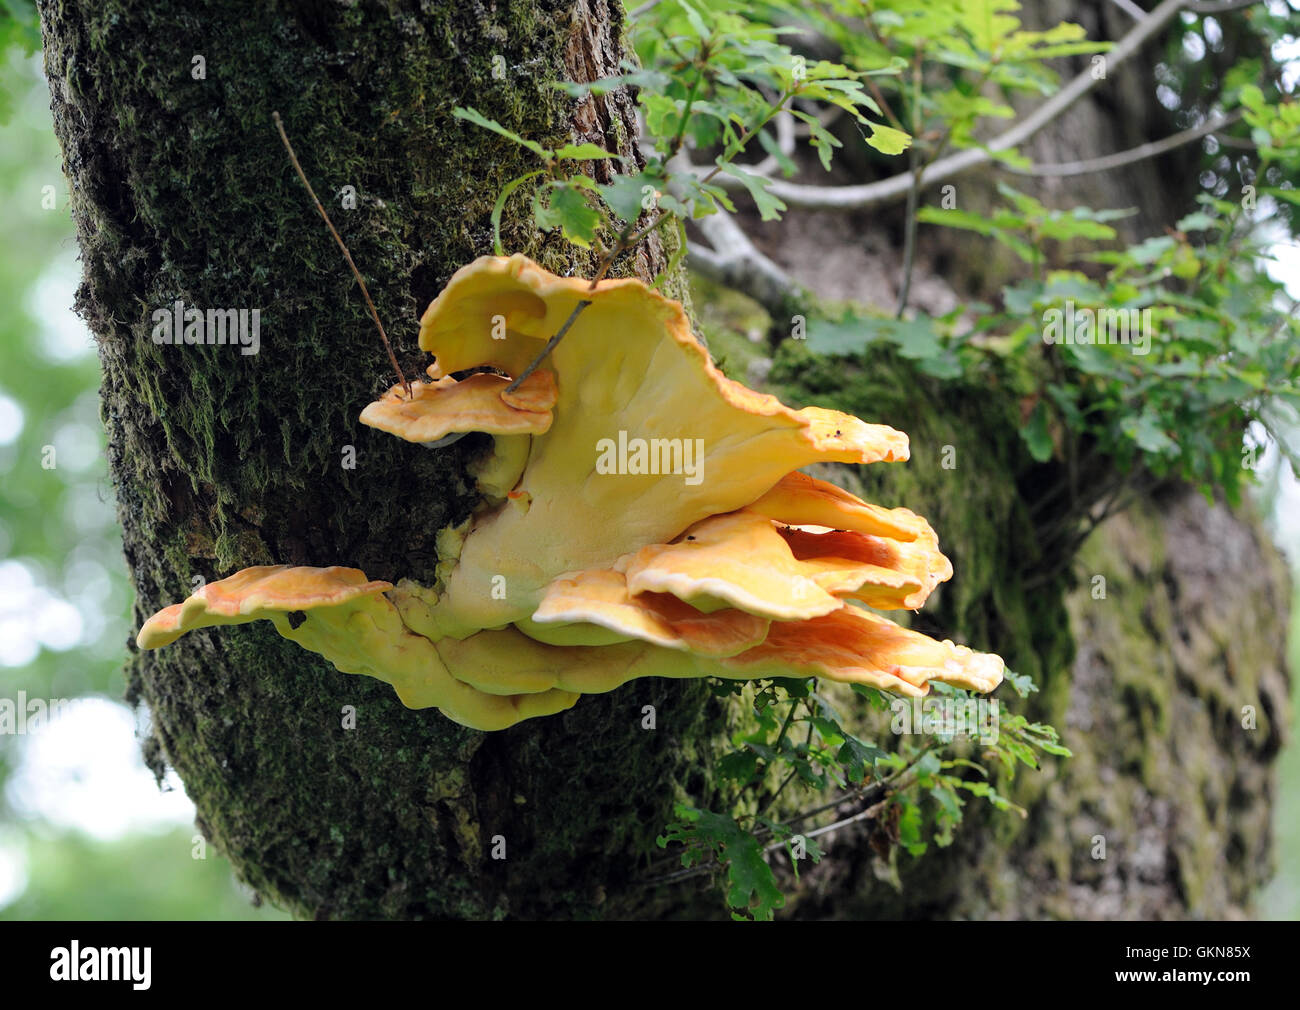 Sulphur shelf or chicken of the woods fungus (Laetiporus sulphureus) growing on the mossy trunk of an oak tree above Derwent Water Stock Photo